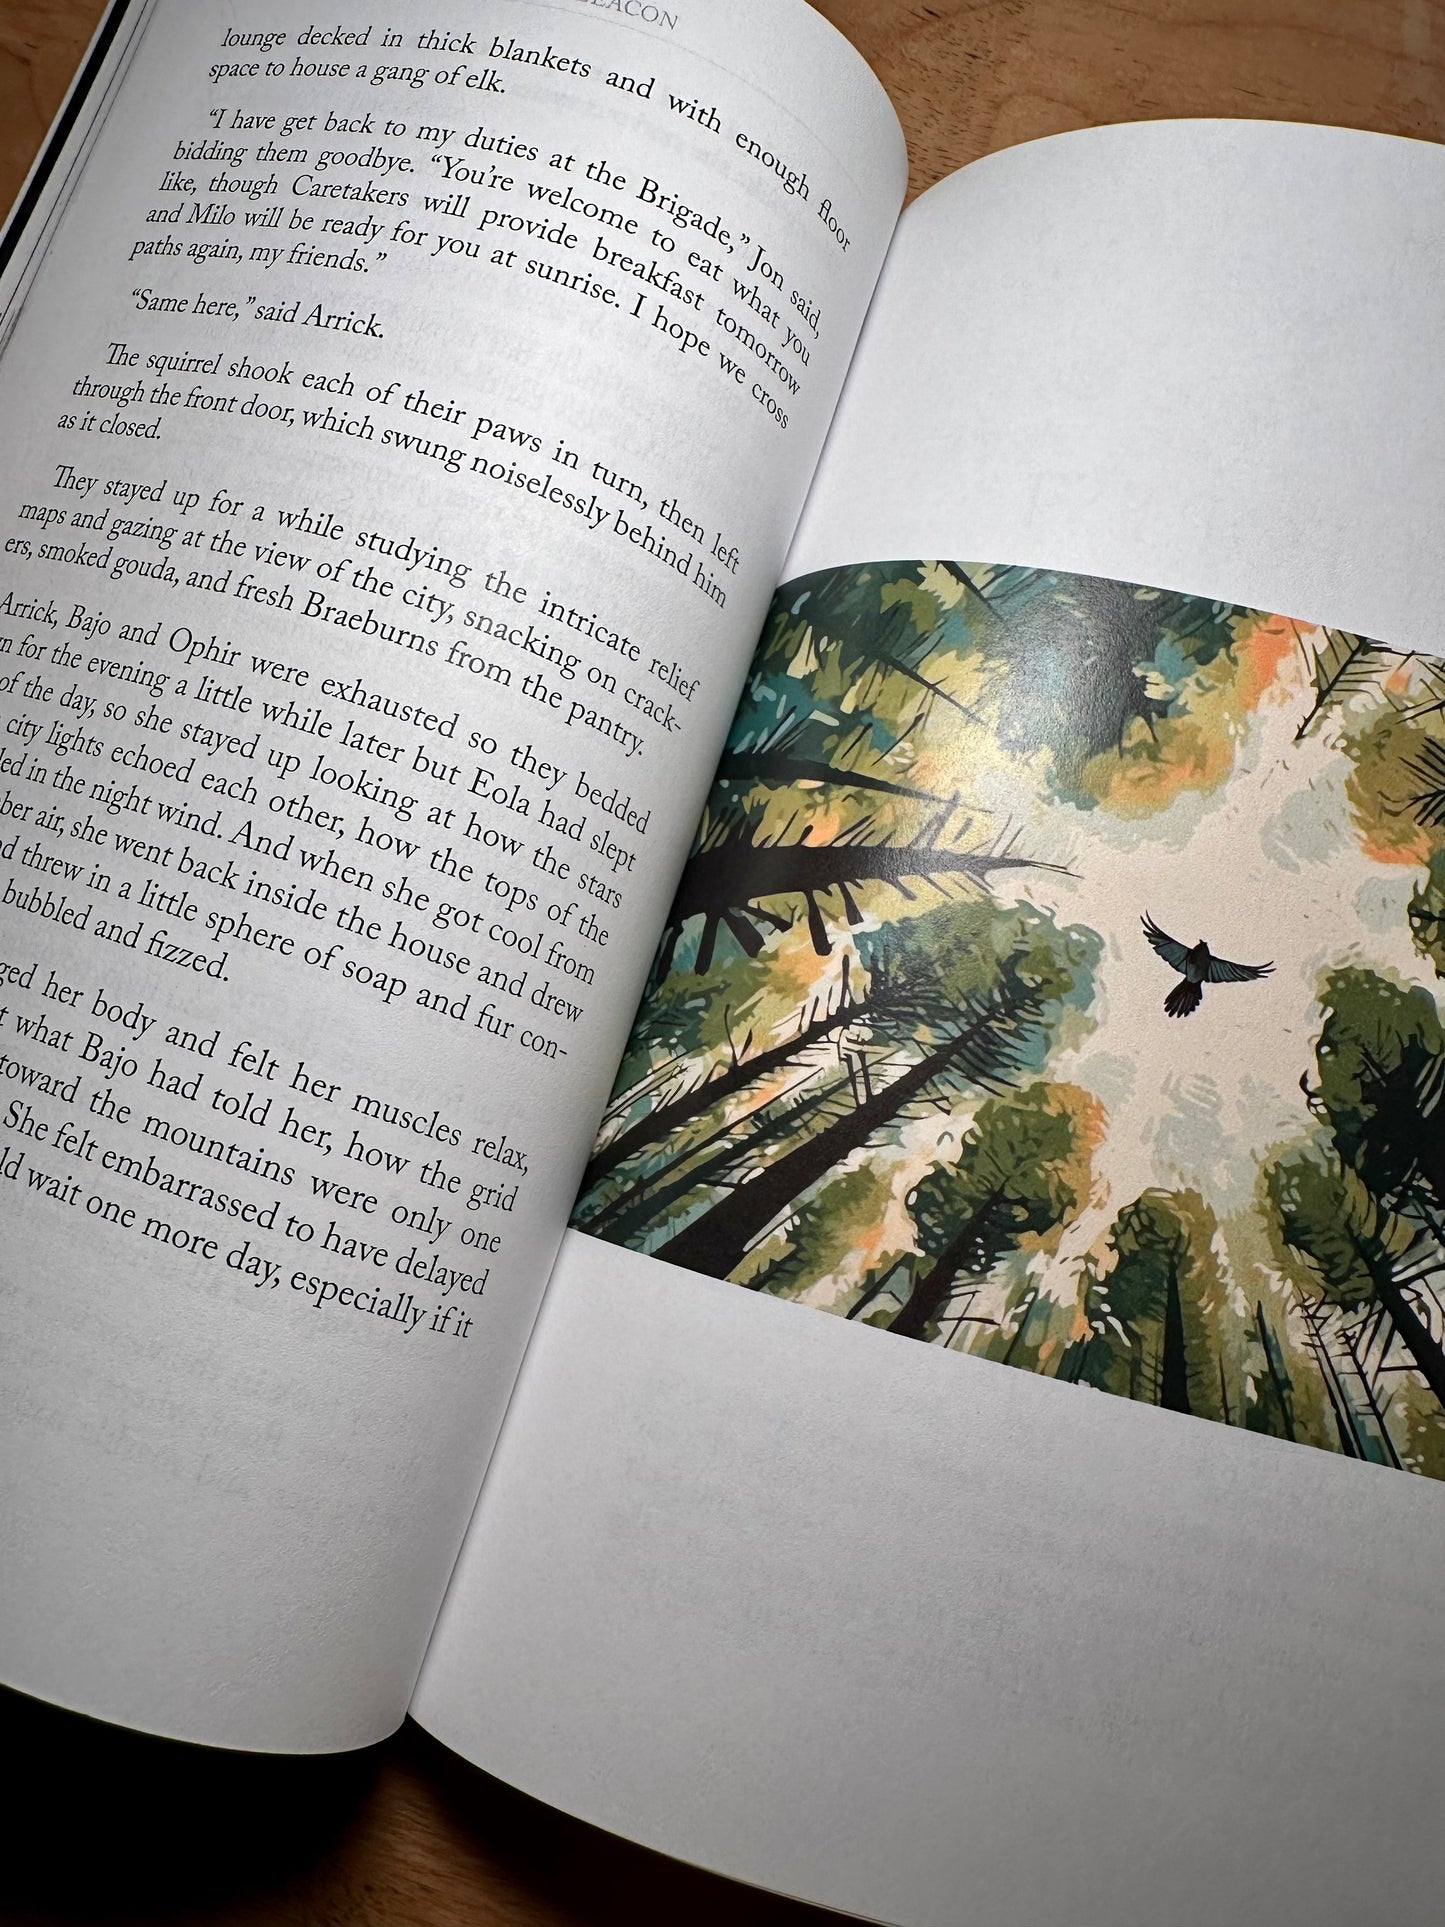 The paperback edition of the blue beacon opened to a page of the story and an illustration of a hummingbird flying down through a canopy of trees 